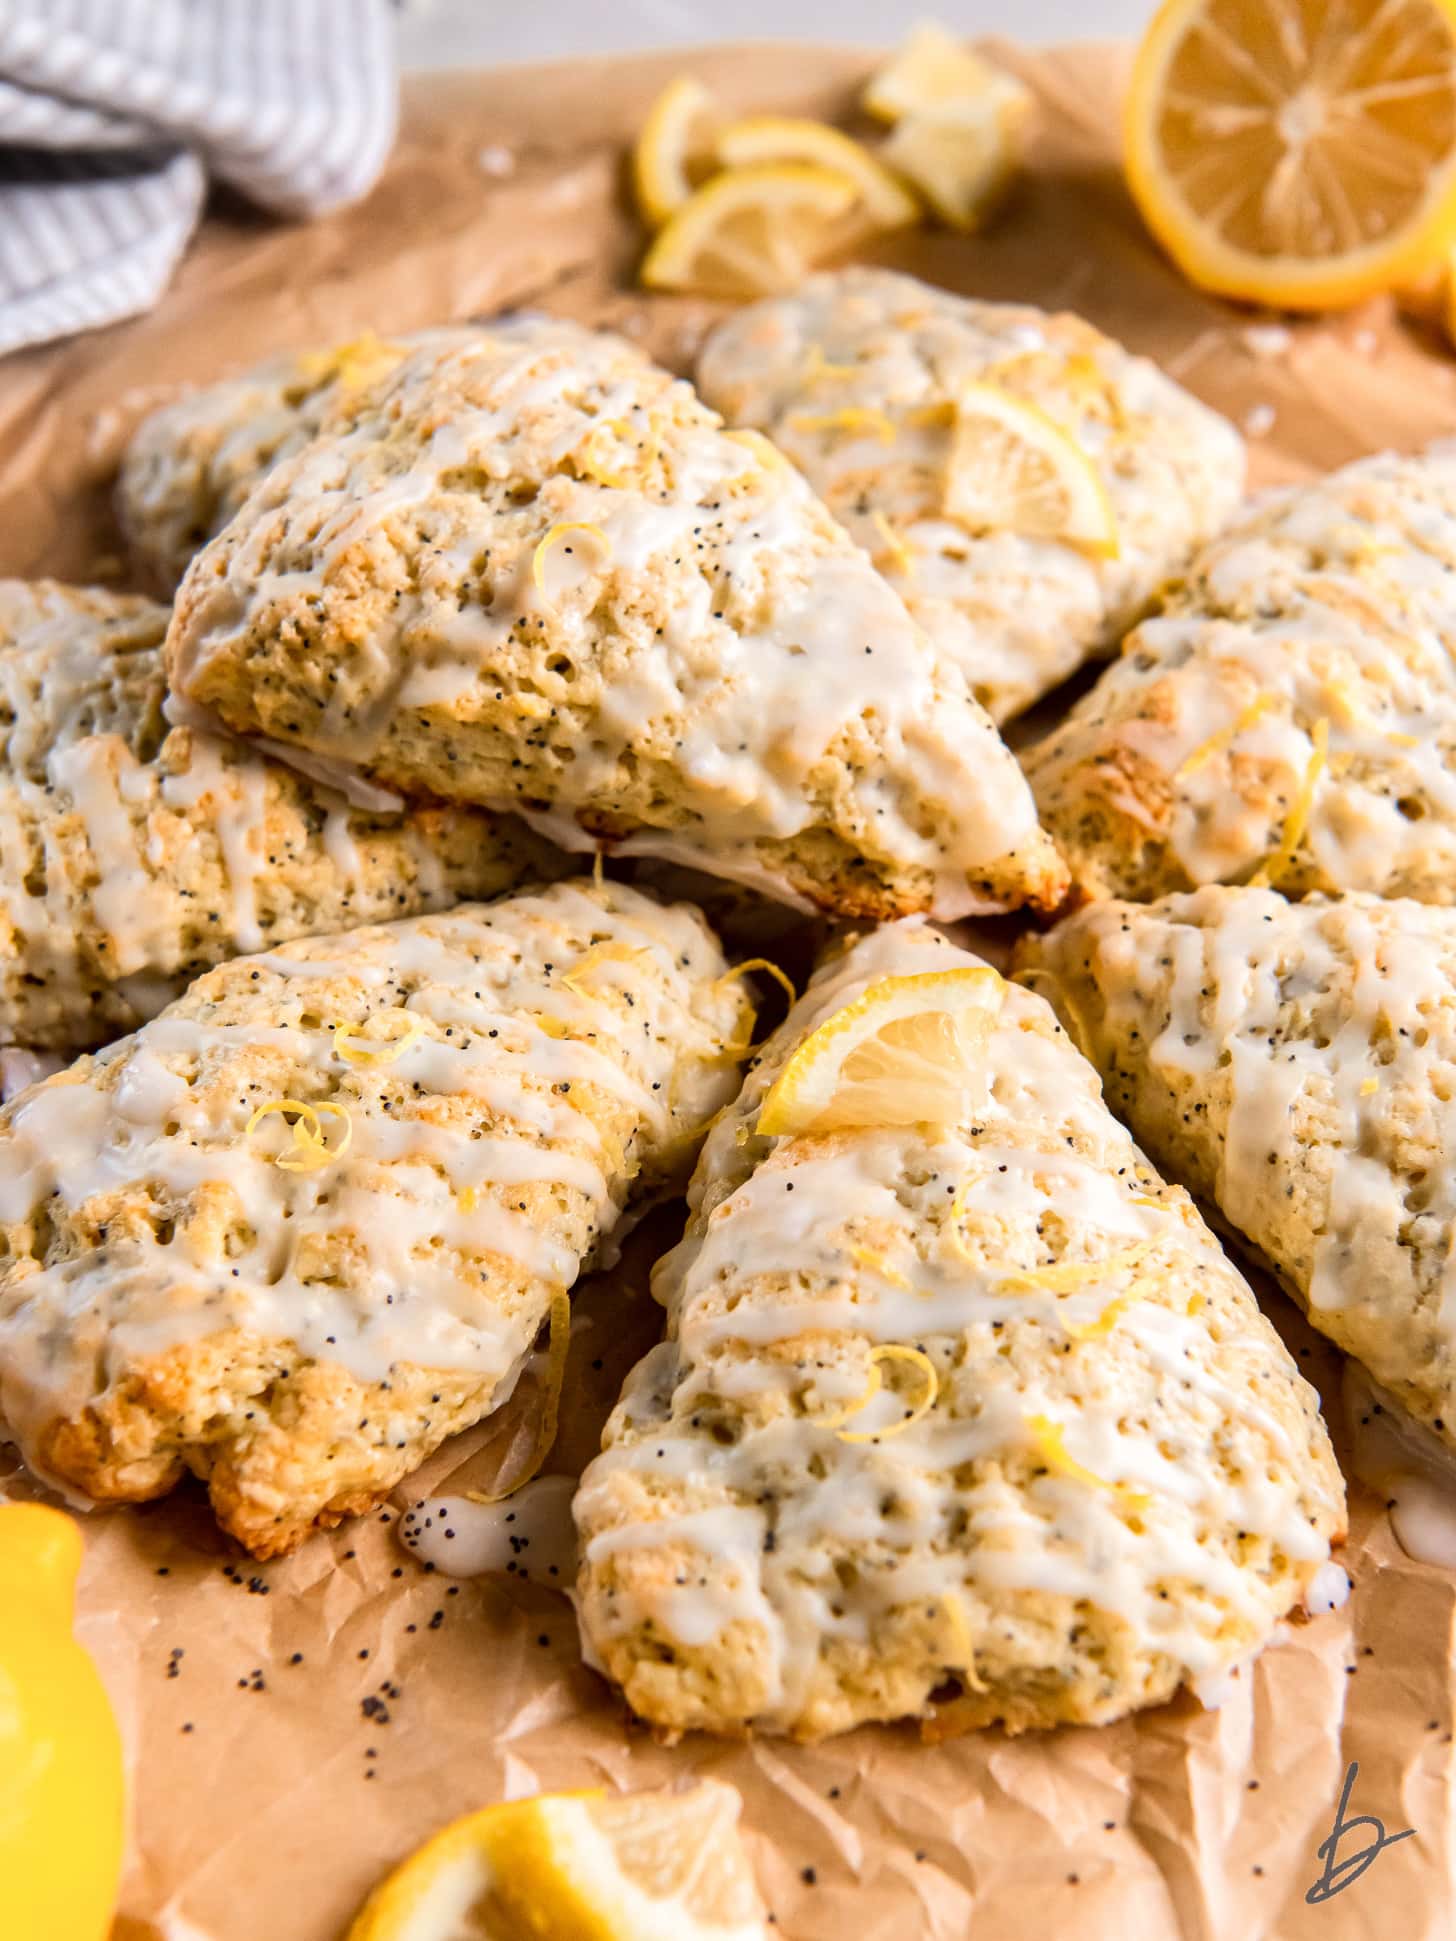 lemon poppyseed scone with glaze on top of more scones on parchment paper.